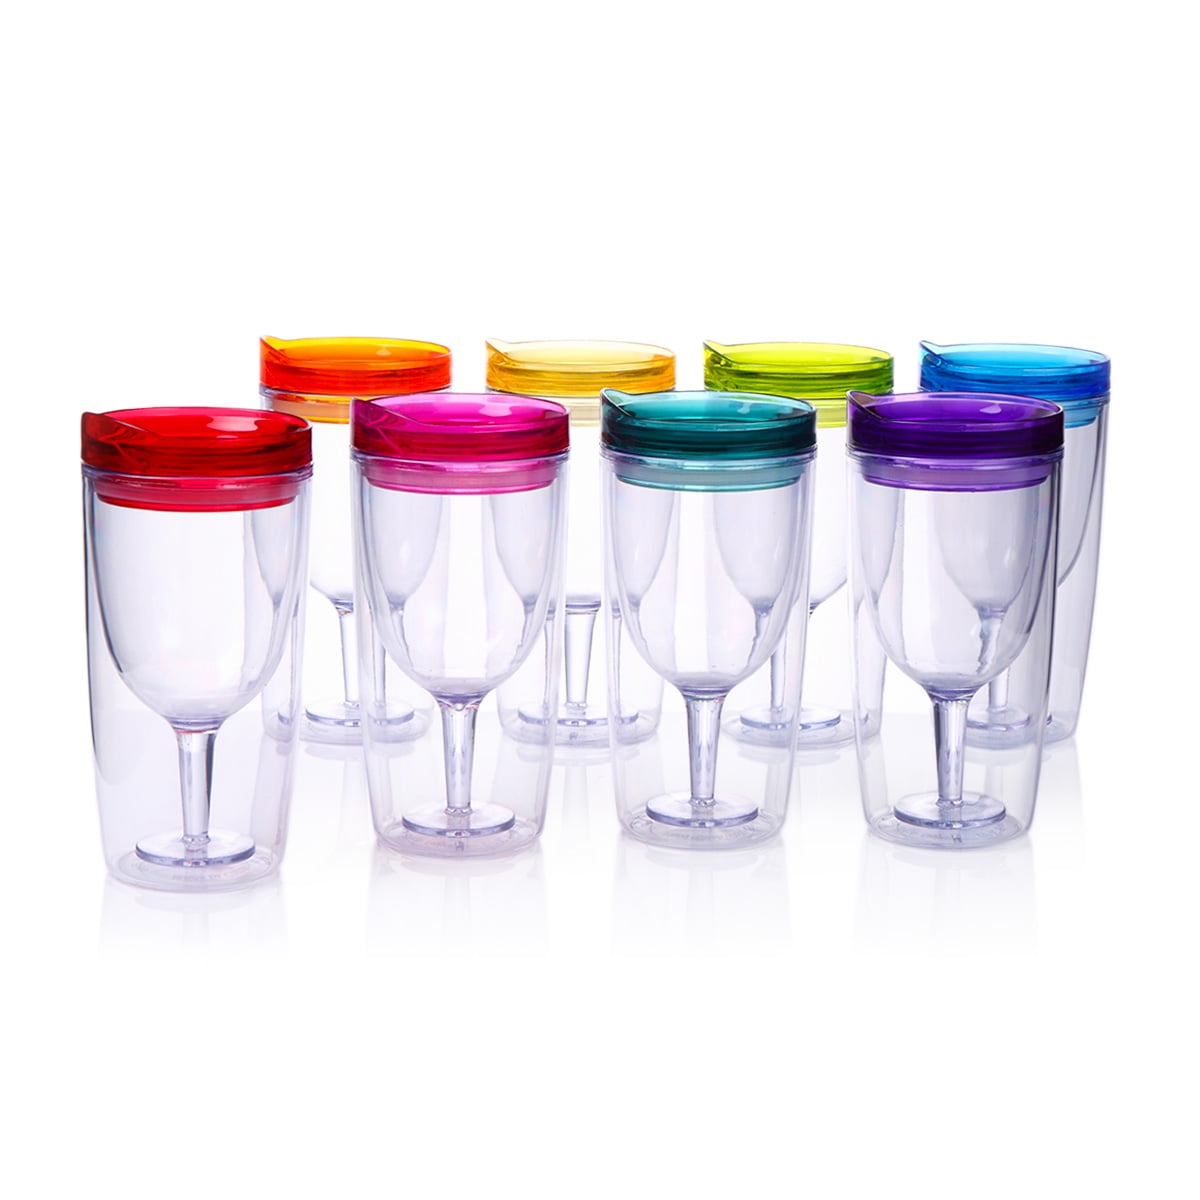 Cupture - Insulated Wine Tumbler Cup with Drink, Through Lid, 10 oz, 8 Pack